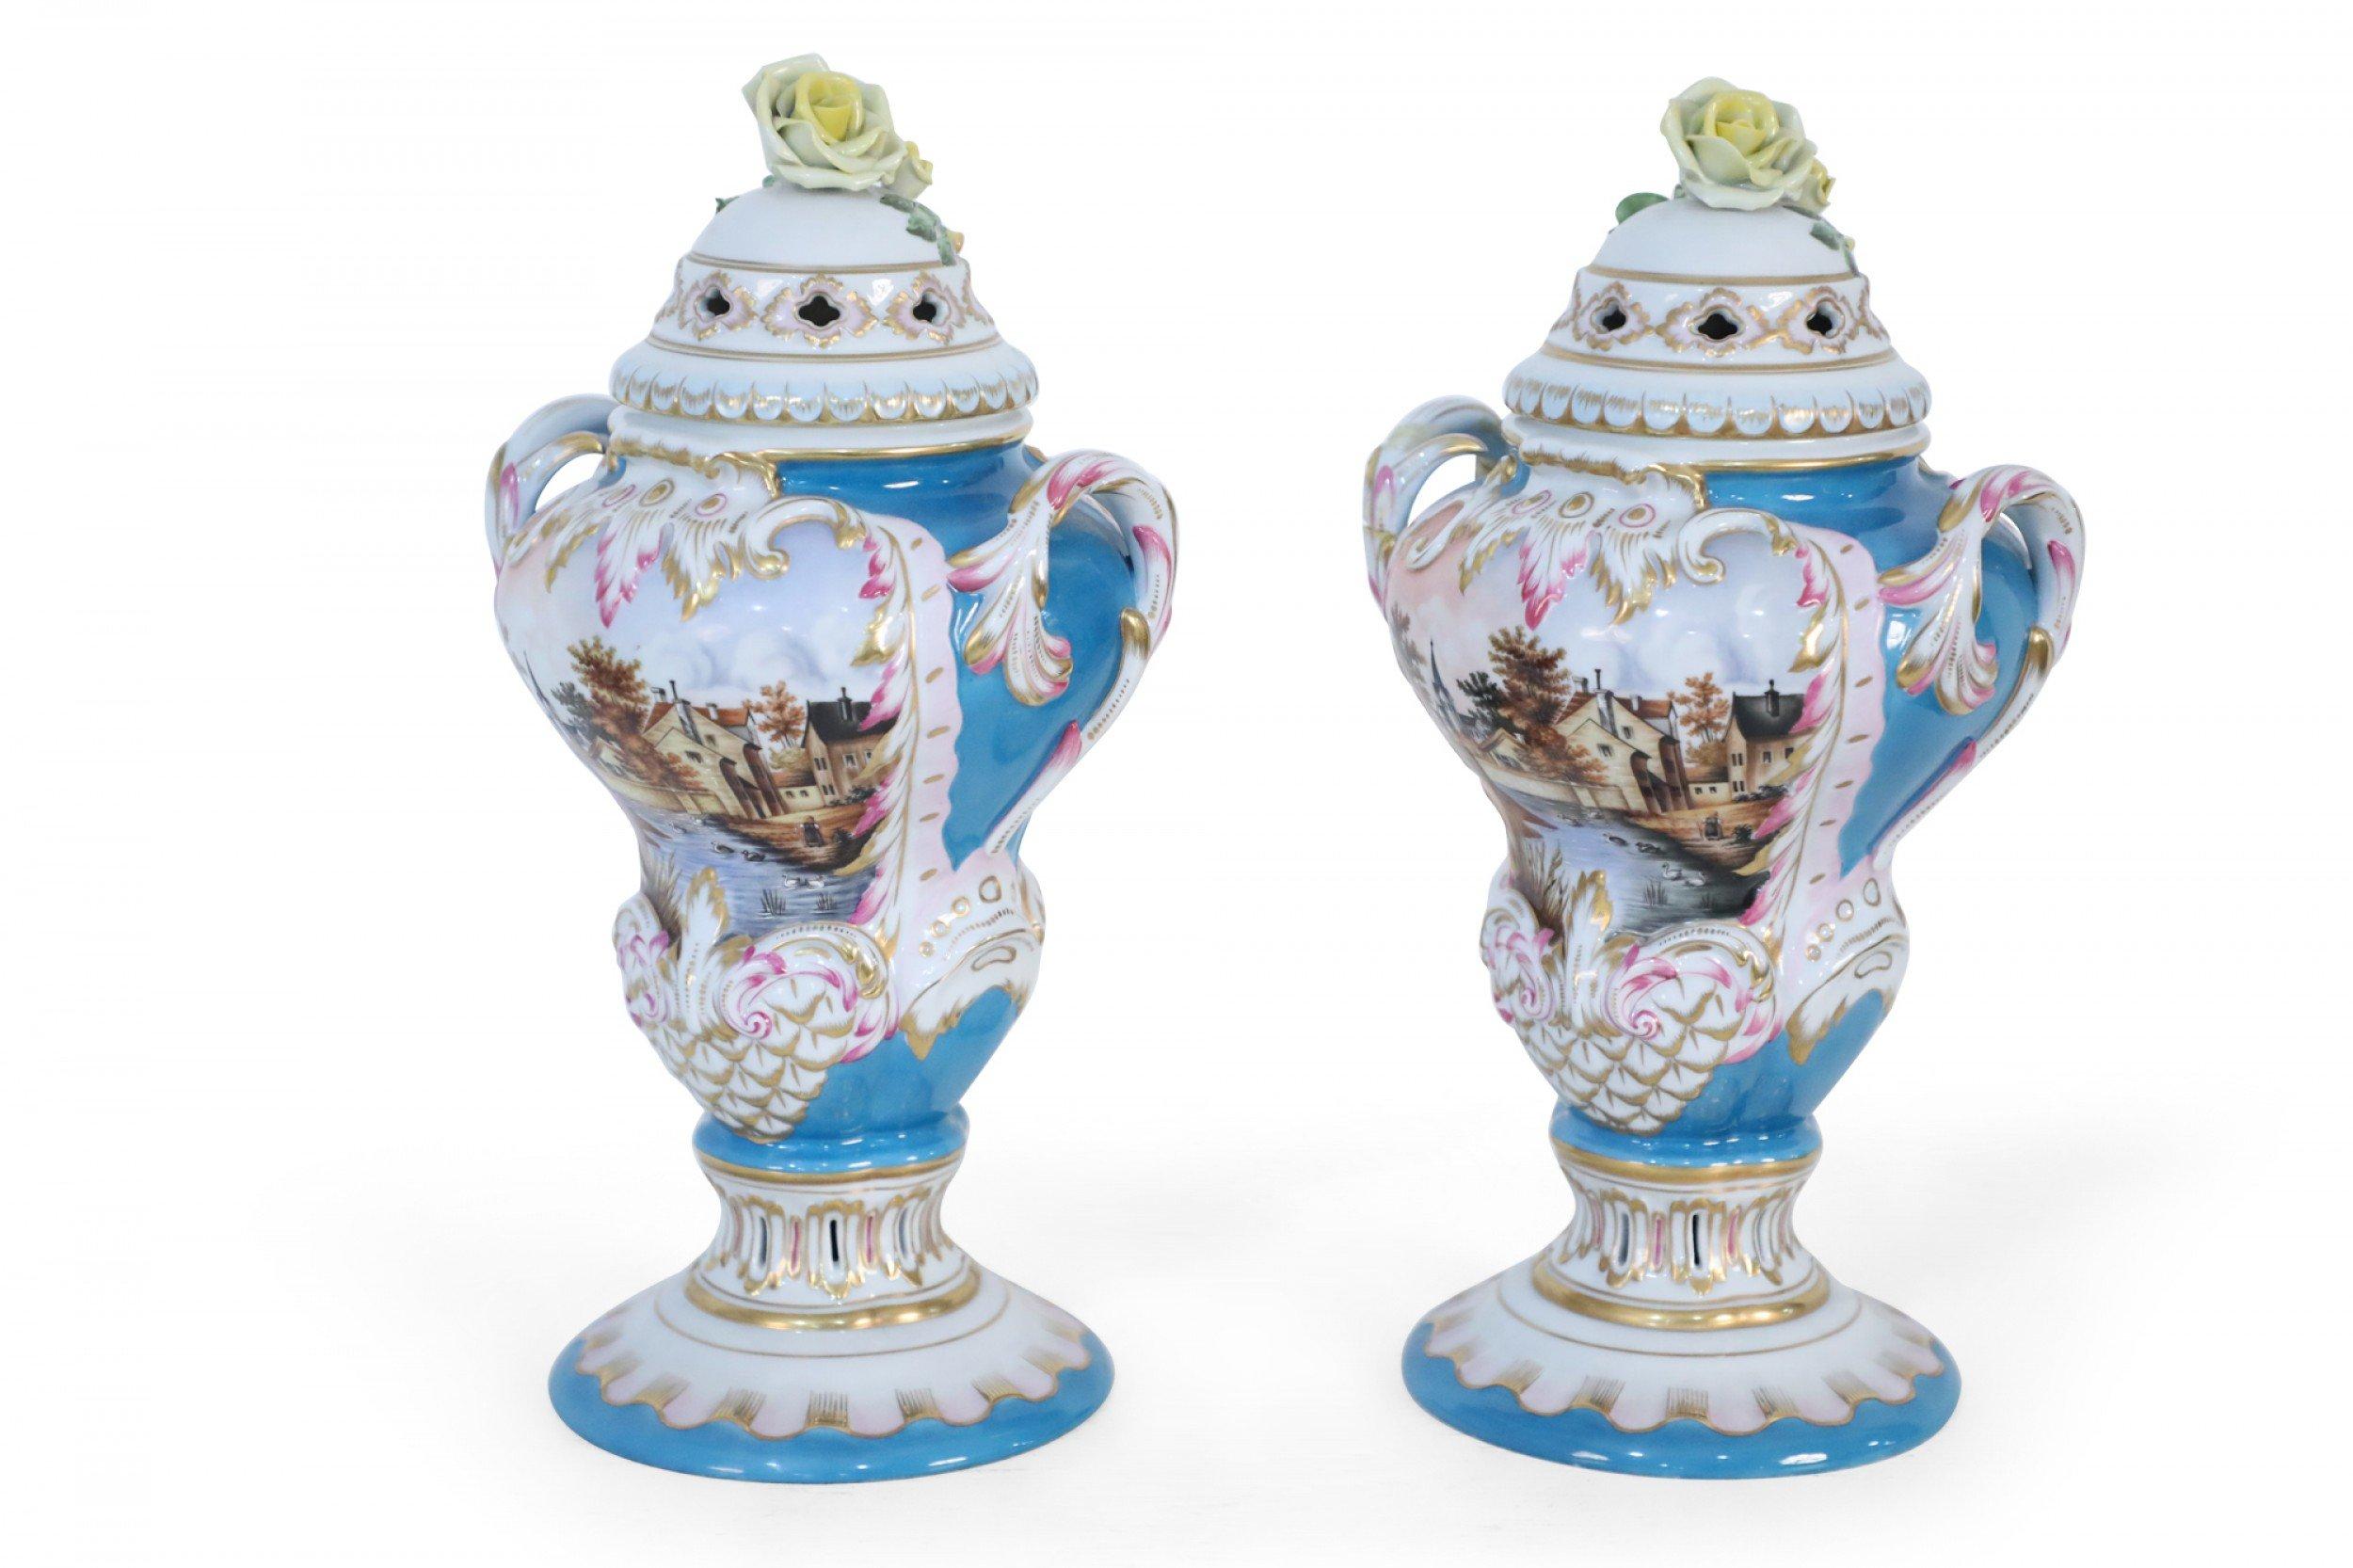 Rococo Pair of Herend Hungarian Blue Decorated and Lidded Porcelain Urns For Sale